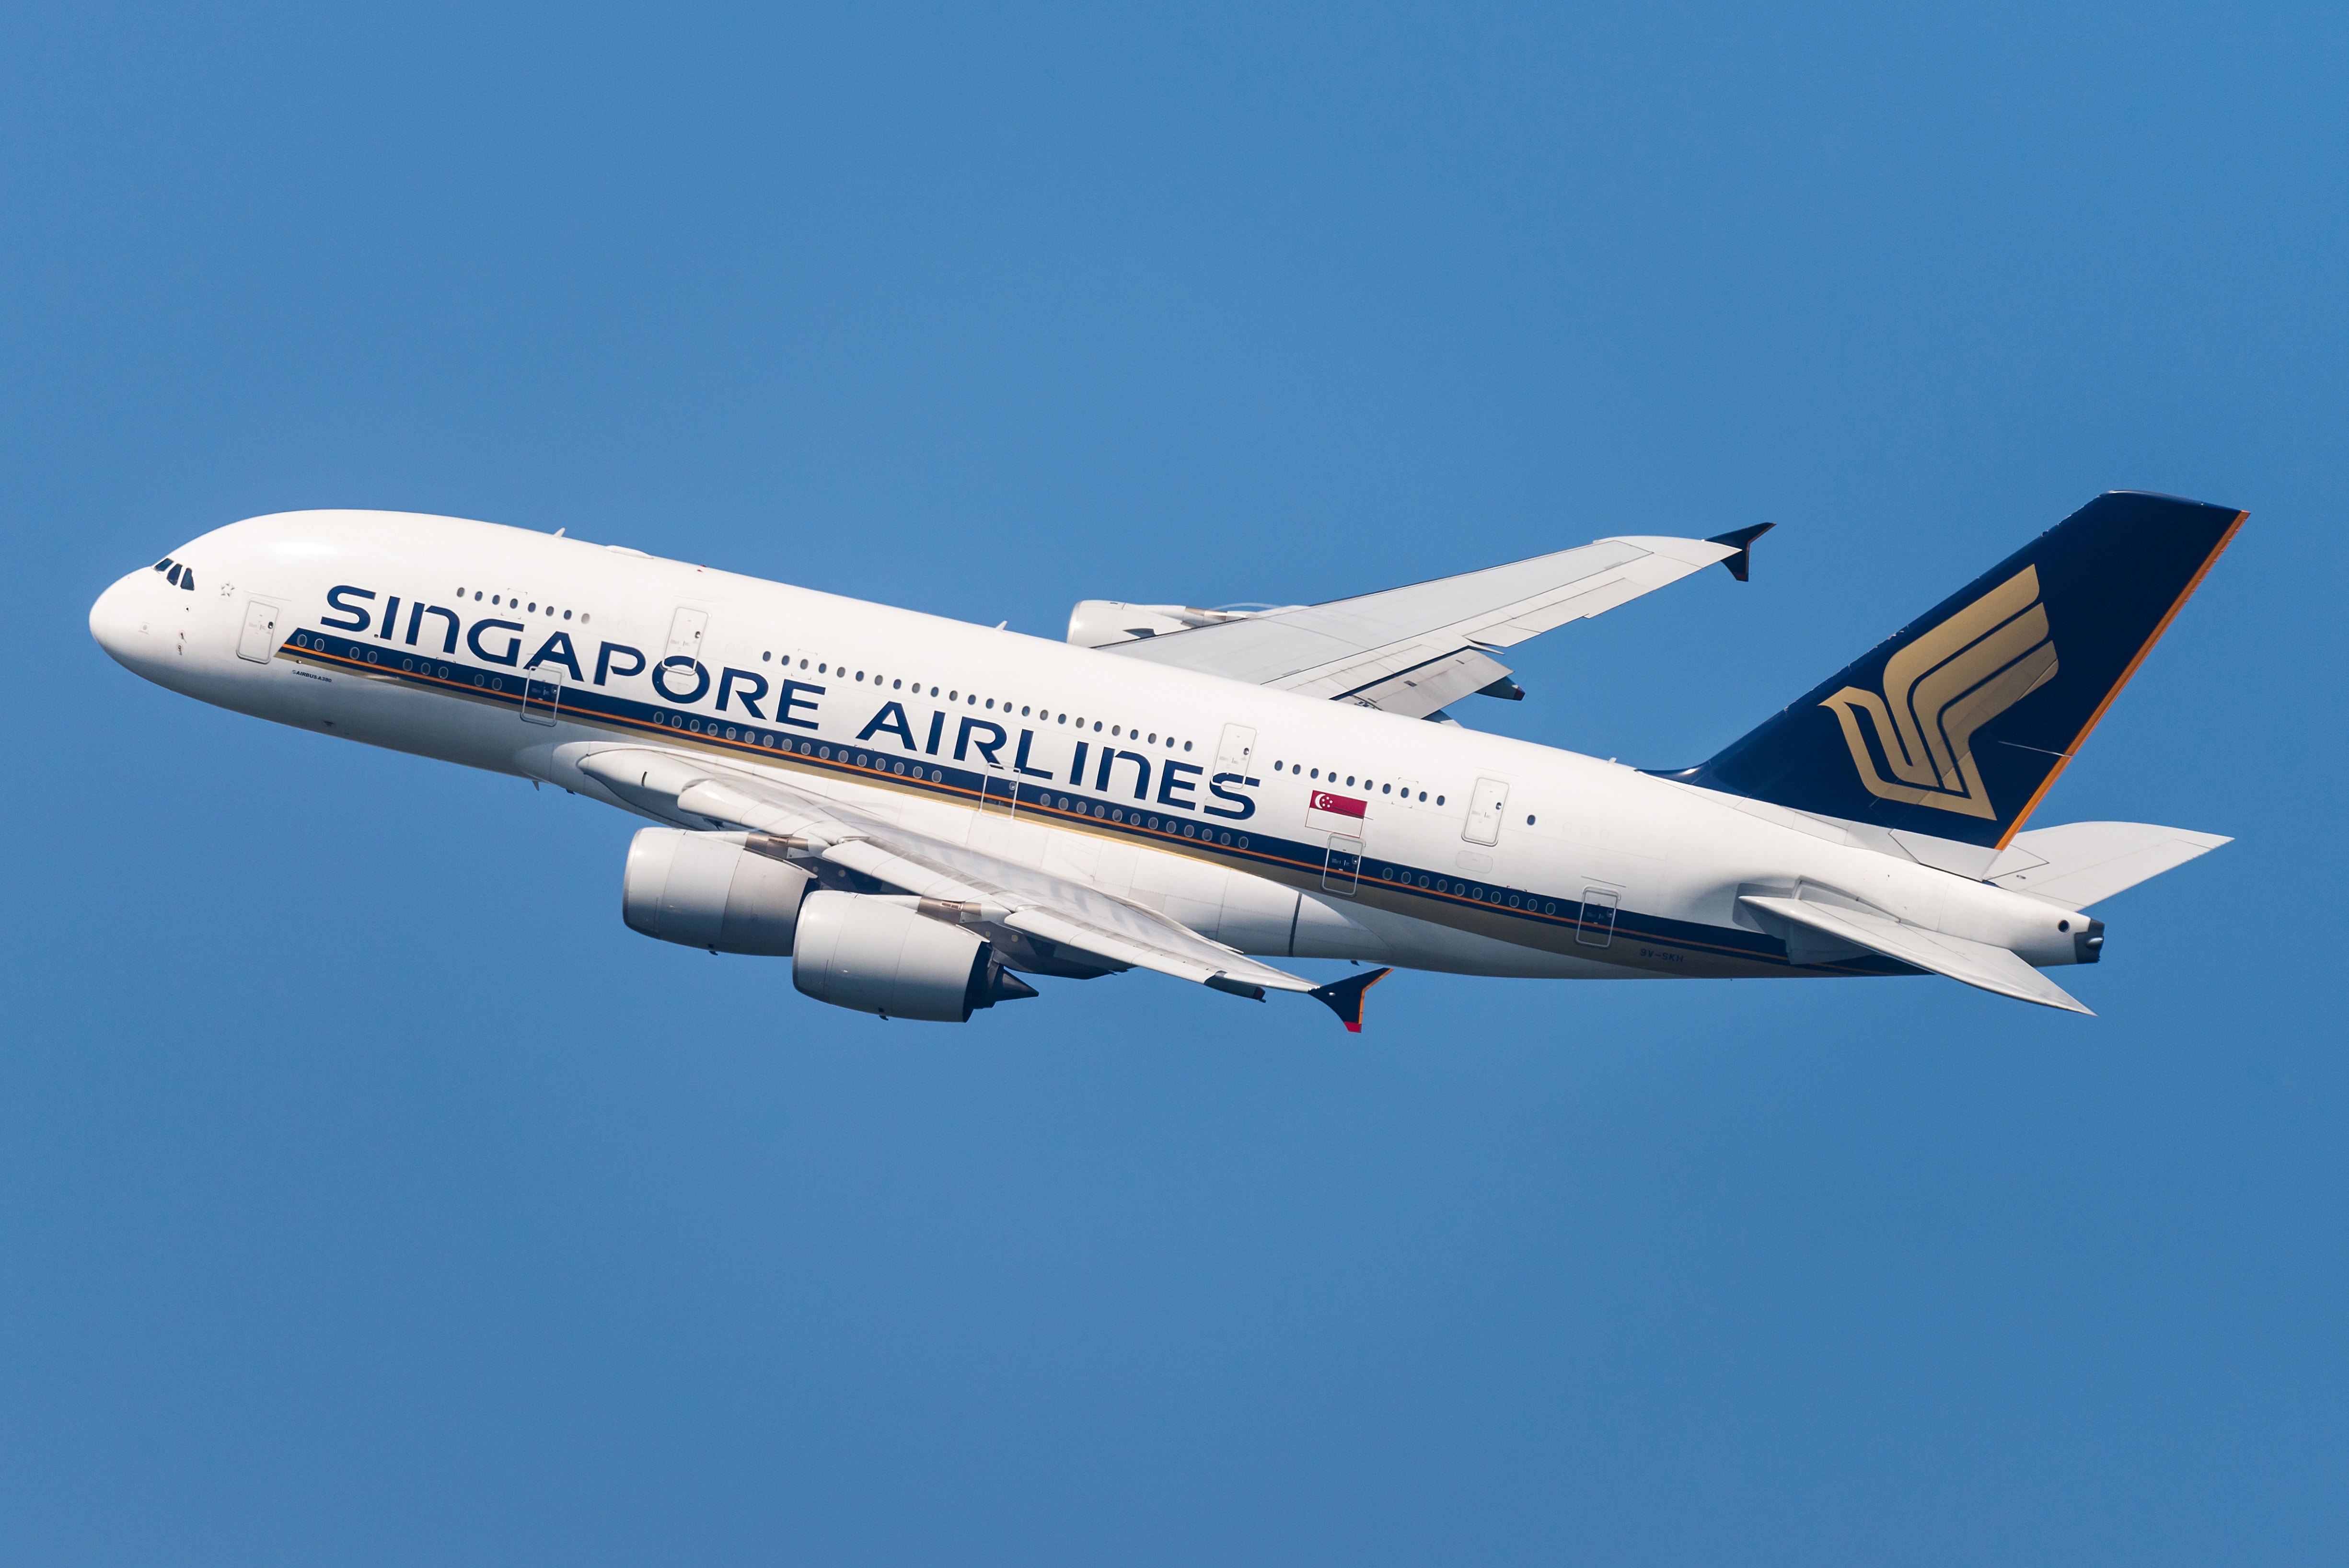 Fighter Jets Escort Singapore Airlines Flight From San Francisco 'Till It Landed Safely' After Hoax Bomb Threat